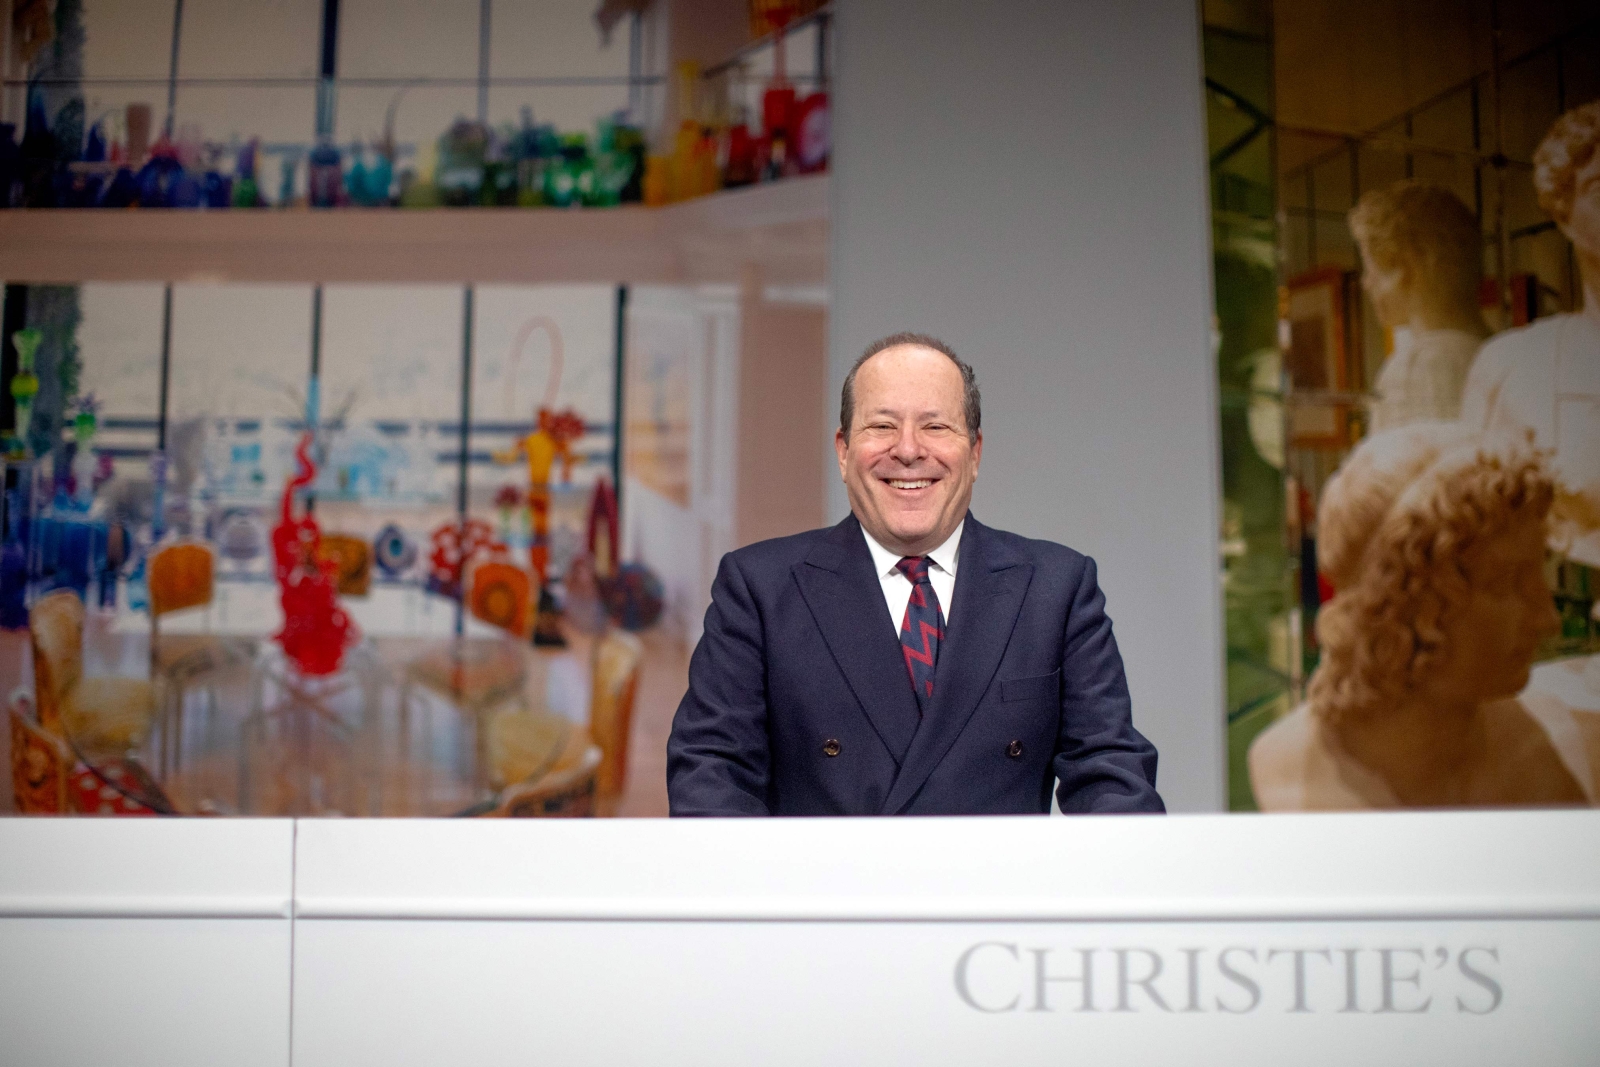 Marc Porter standing behind a large desk, smiling. The desk has the text "CHRISTIE'S" on the front, and in the background are large photos of sculptures in gallery spaces.